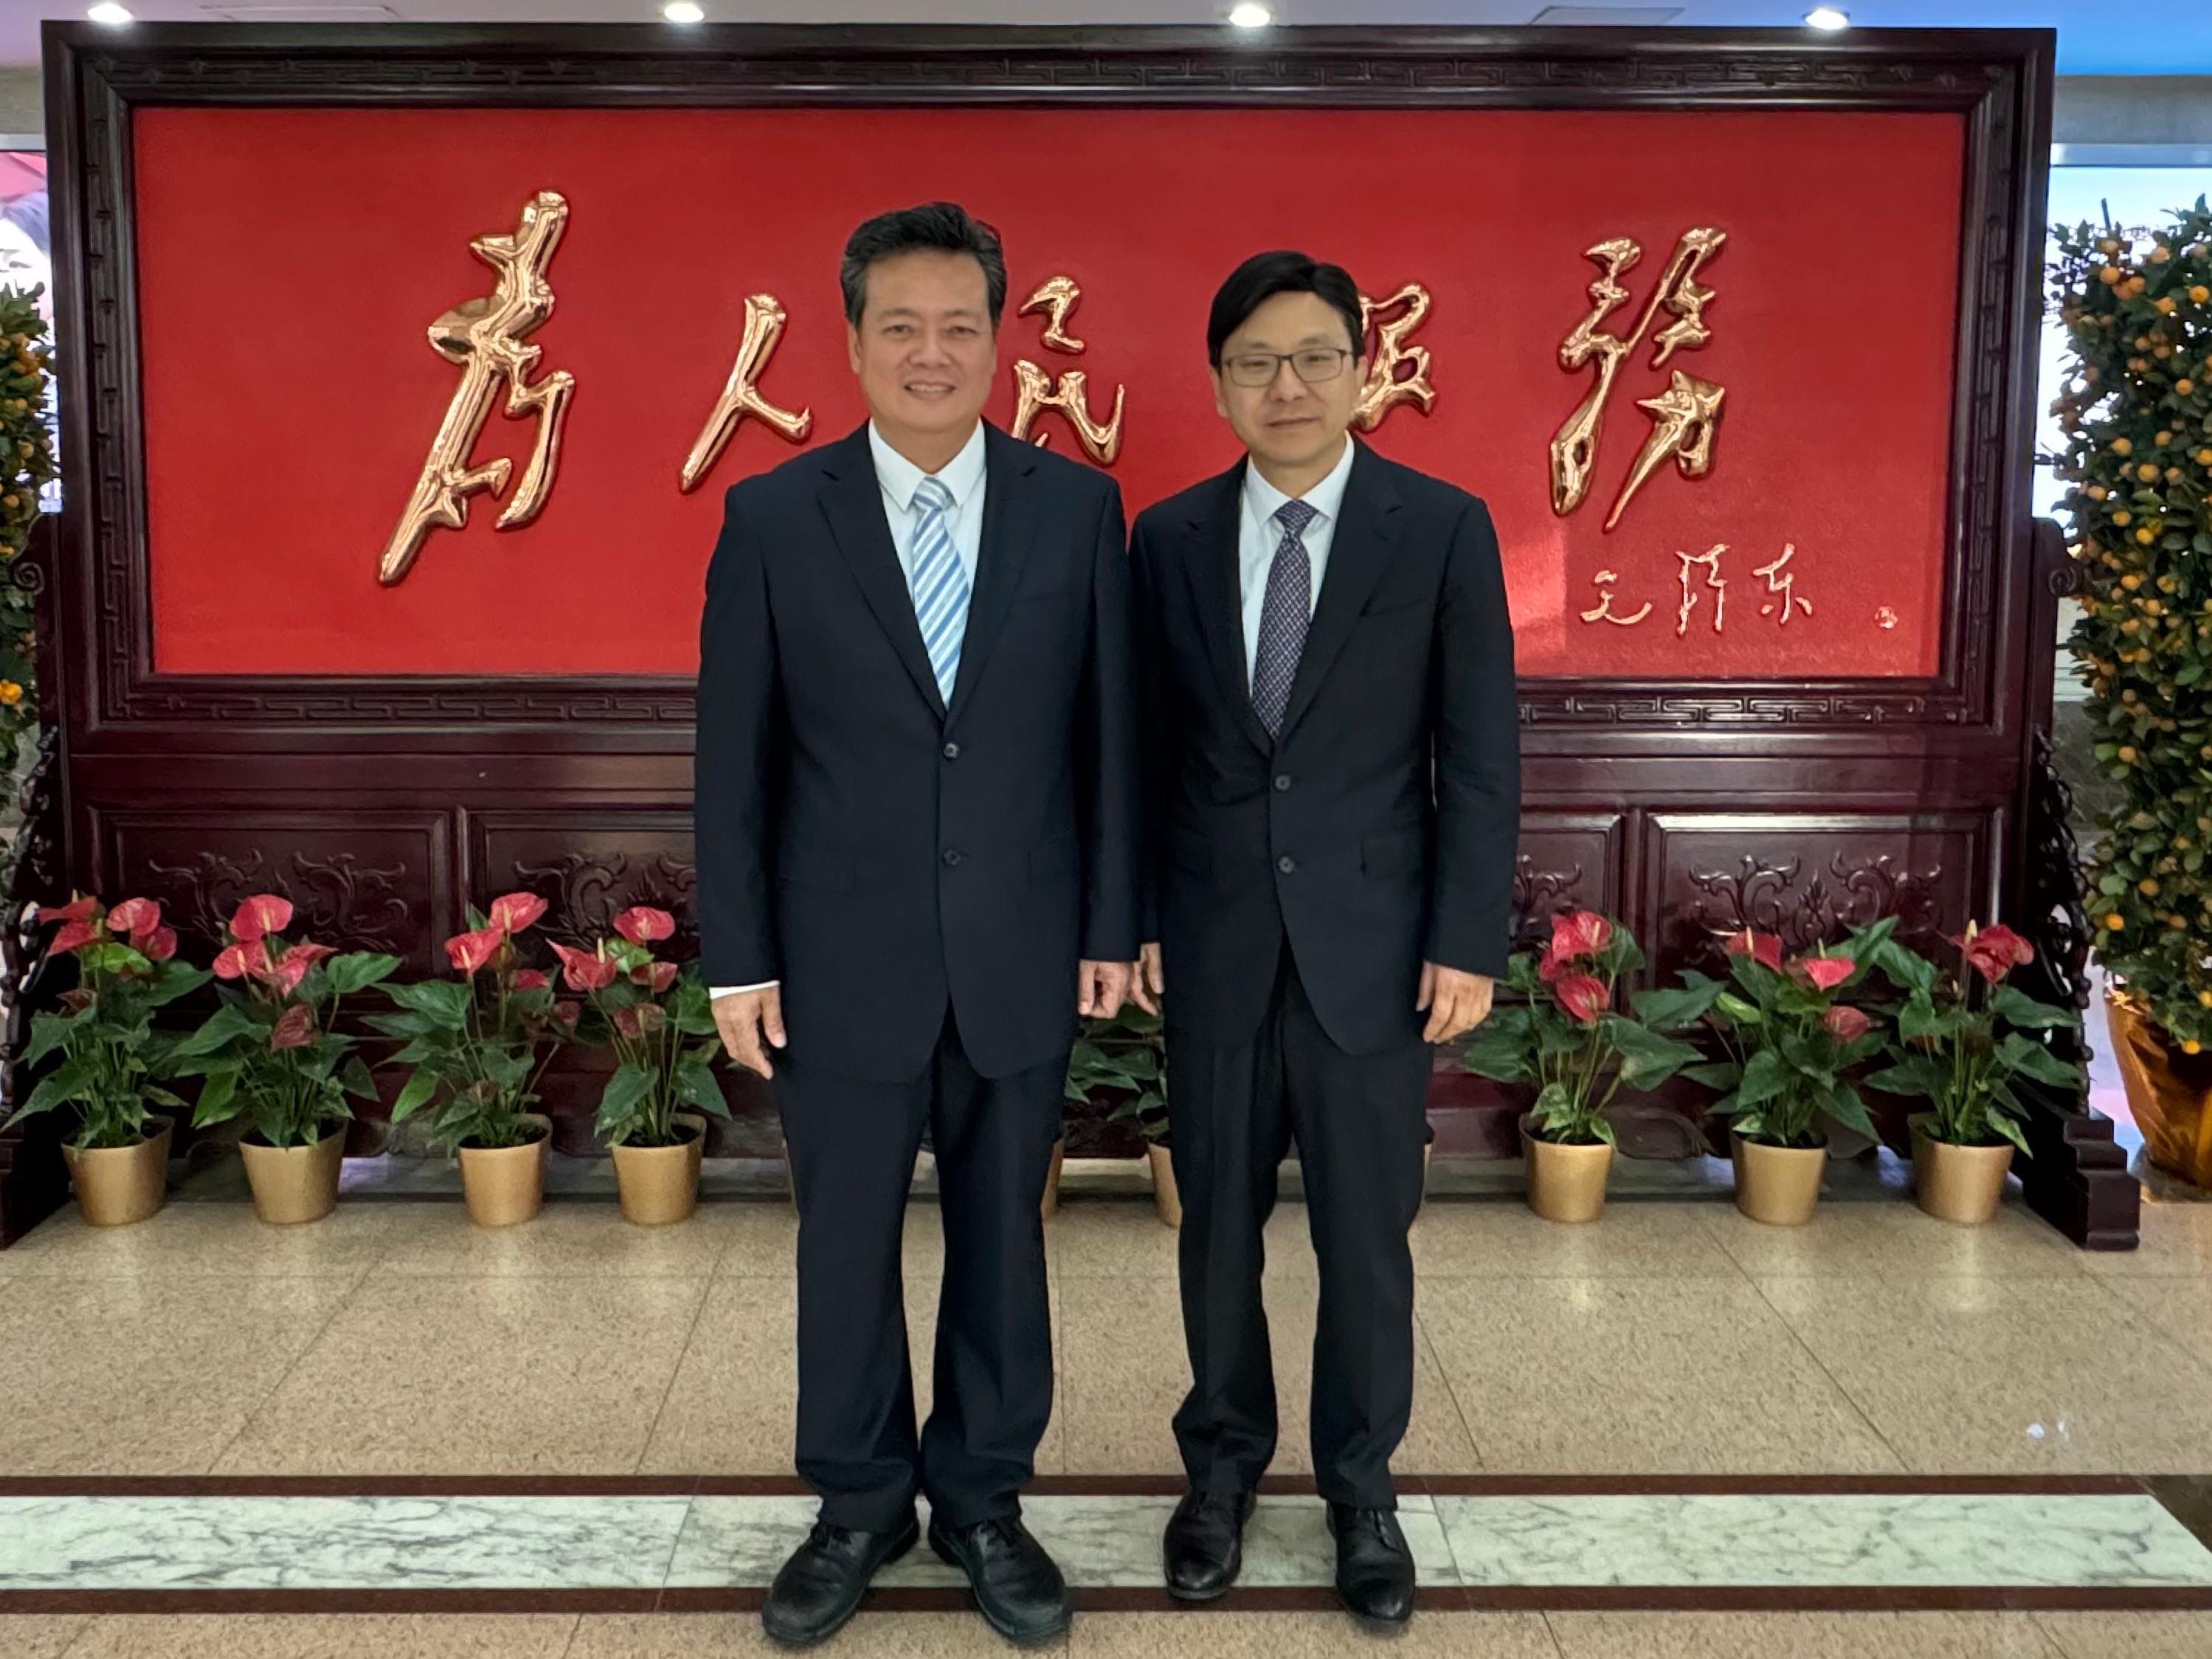 The Secretary for Labour and Welfare, Mr Chris Sun, today (March 5) continued his visit to Fuzhou, Fujian. The Director of Hong Kong Talent Engage, Mr Anthony Lau, also joined the visit. Photo shows Mr Sun (right) at the courtesy call on Deputy Director of the Fujian Provincial Department of Human Resources and Social Security Mr Hong Changchun (left) this morning. They exchanged views on endeavours to attract and support outside talent.